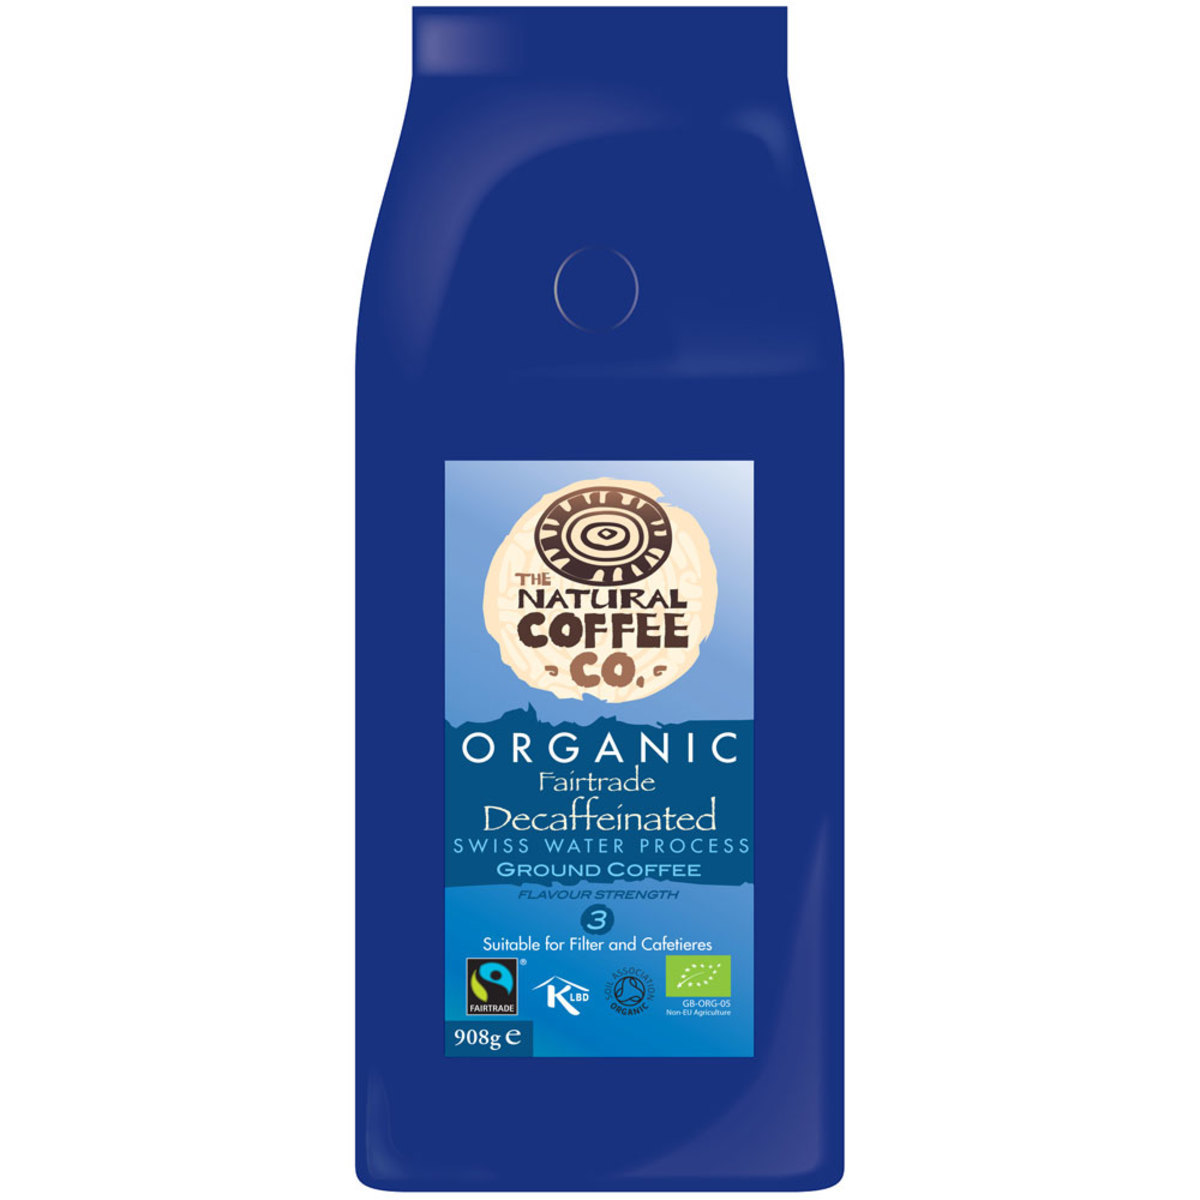 The Natural Coffee Co. Organic Decaffeinated Swiss Water Processed Ground Coffee, 908g